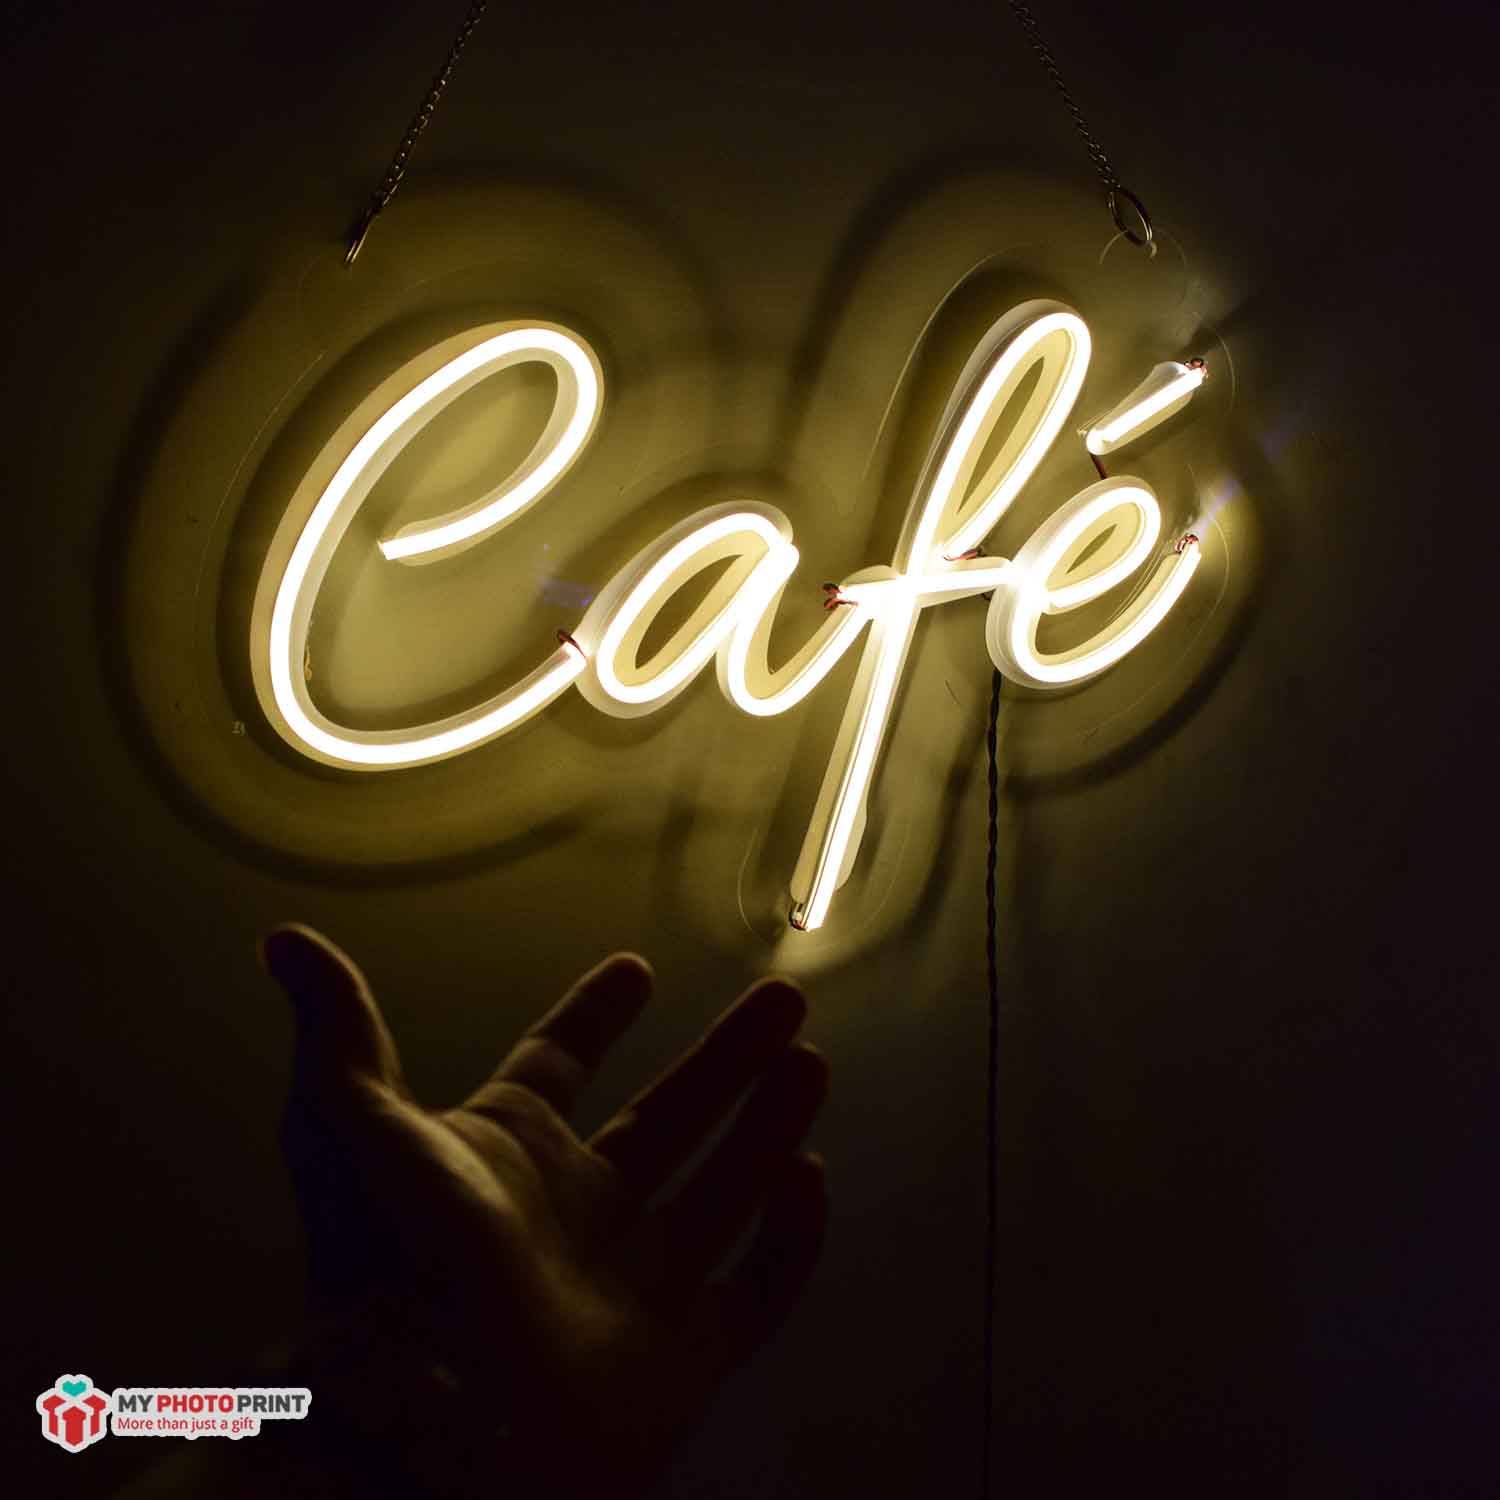 Neon Cafe Led Neon Sign Decorative Lights Wall Decor